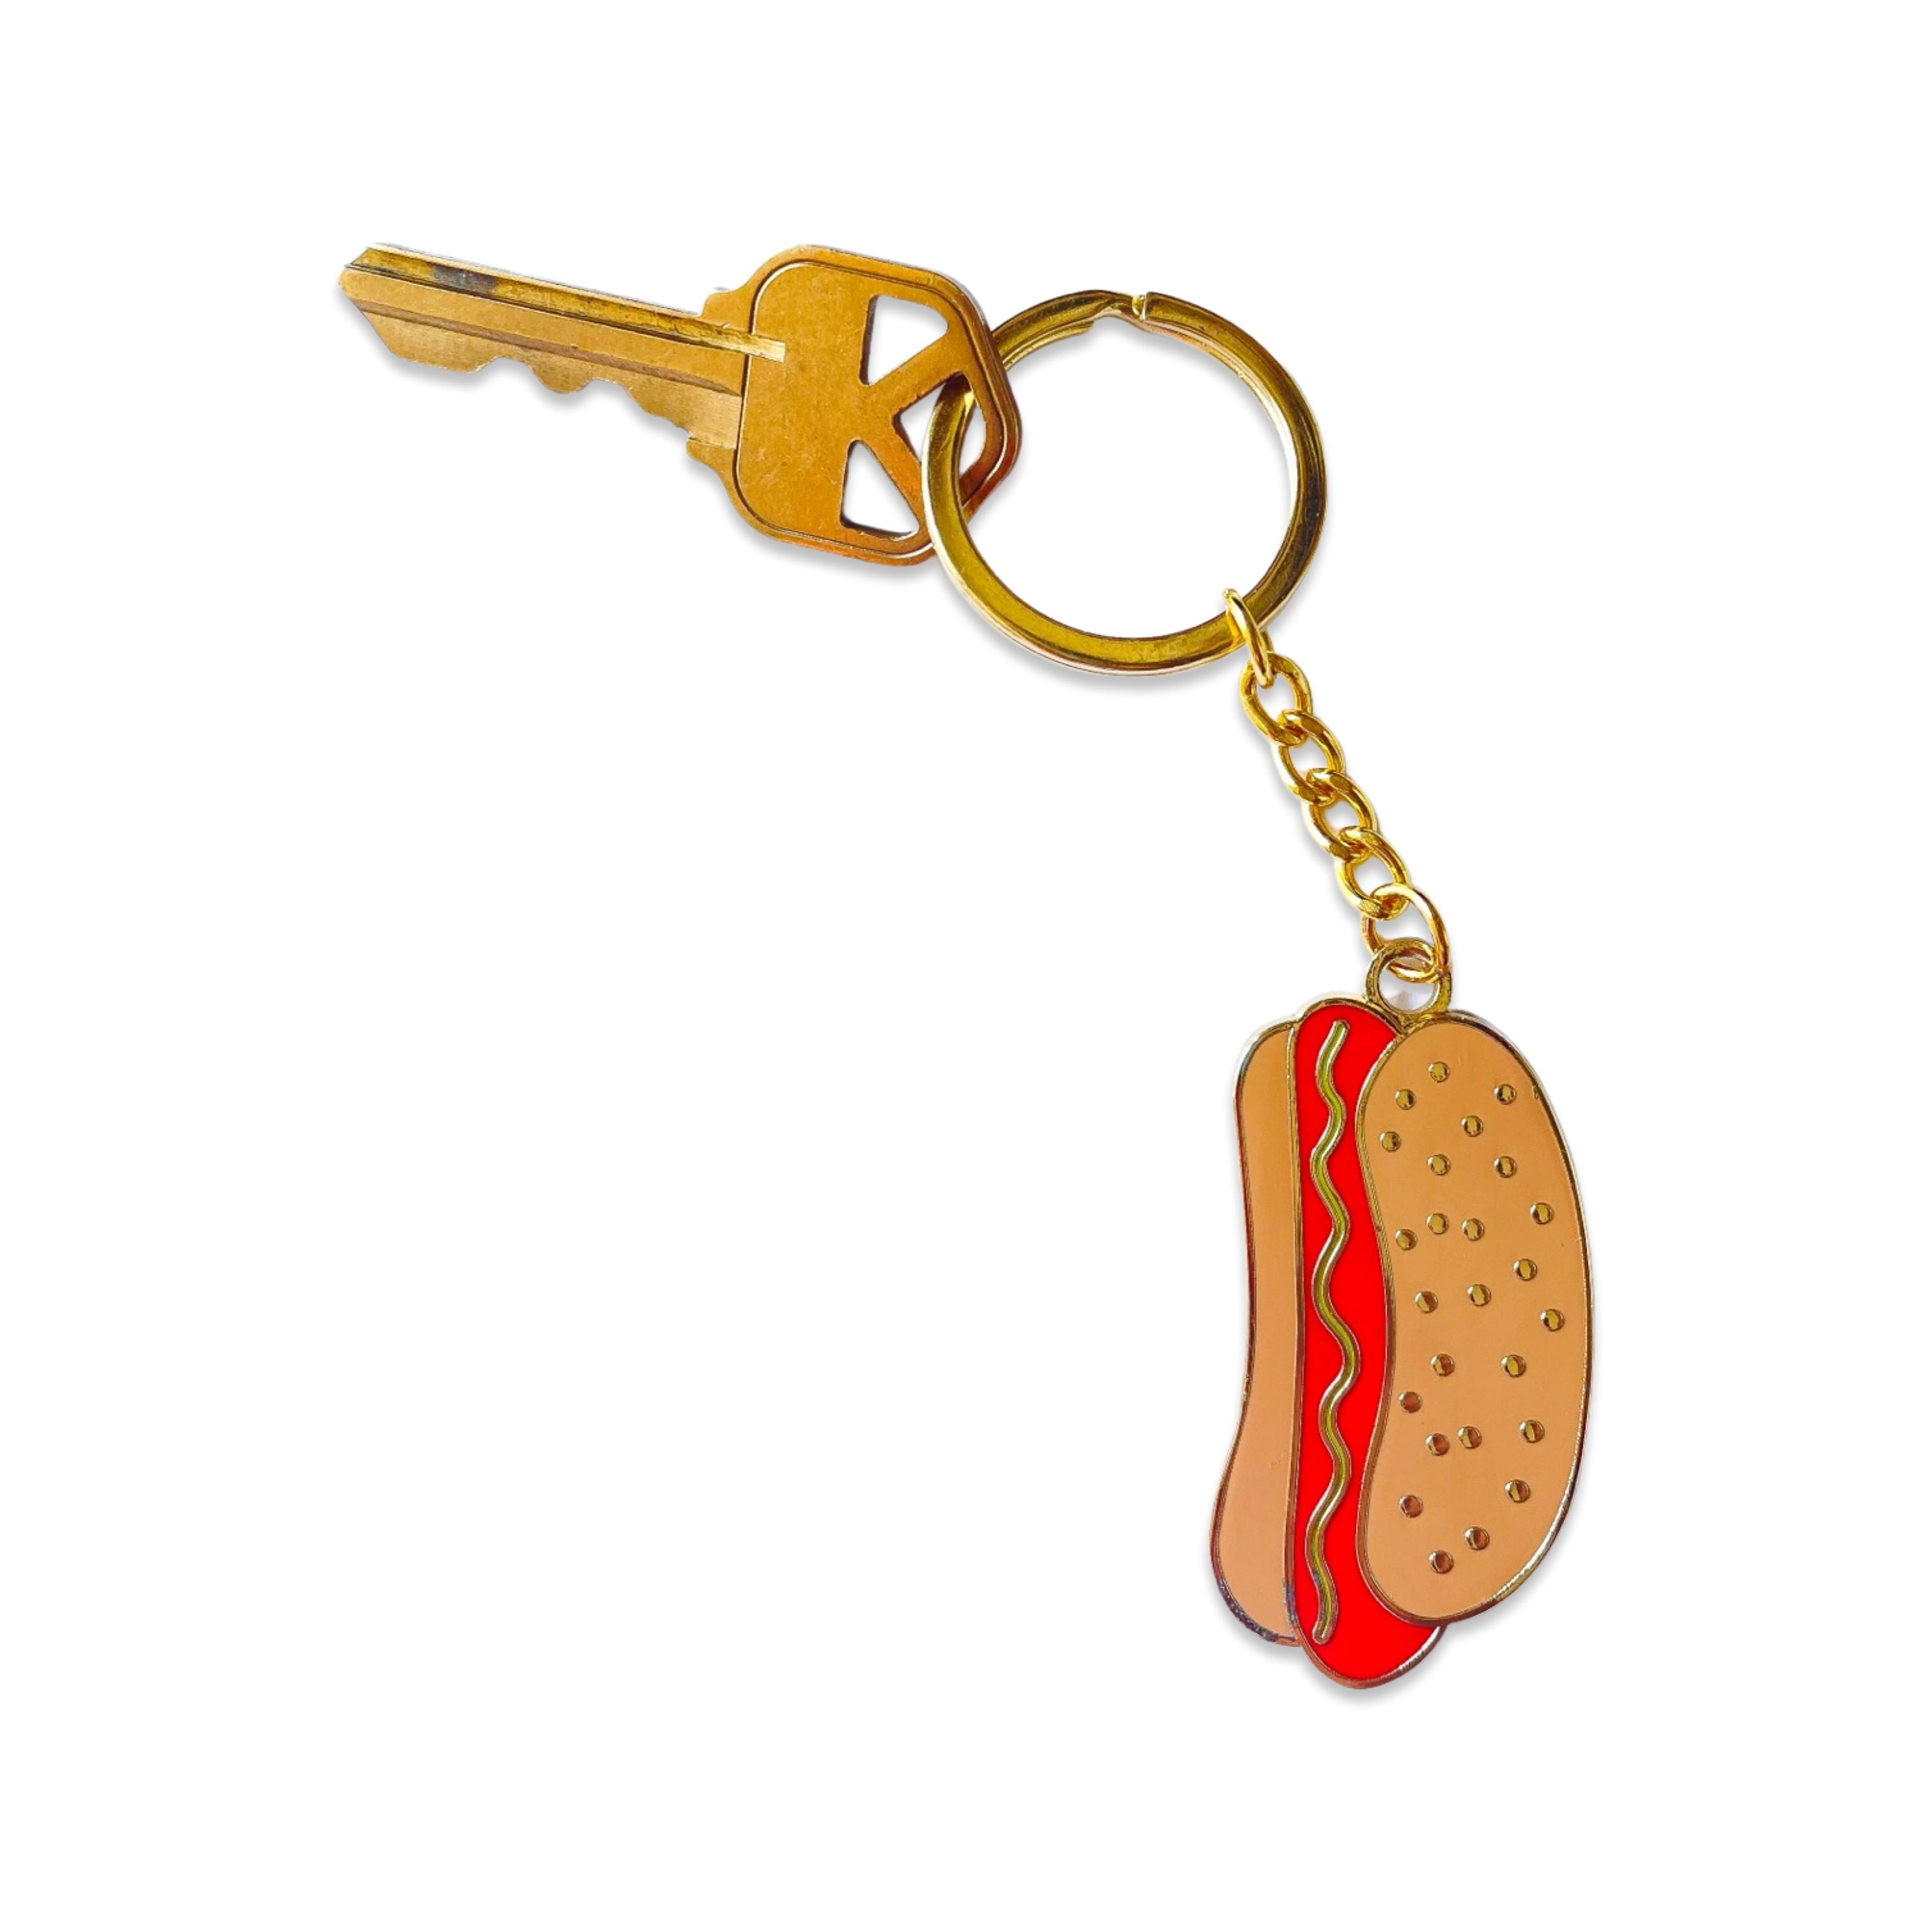 Realistic hot dog on a keychain - a keychain with food - gift idea